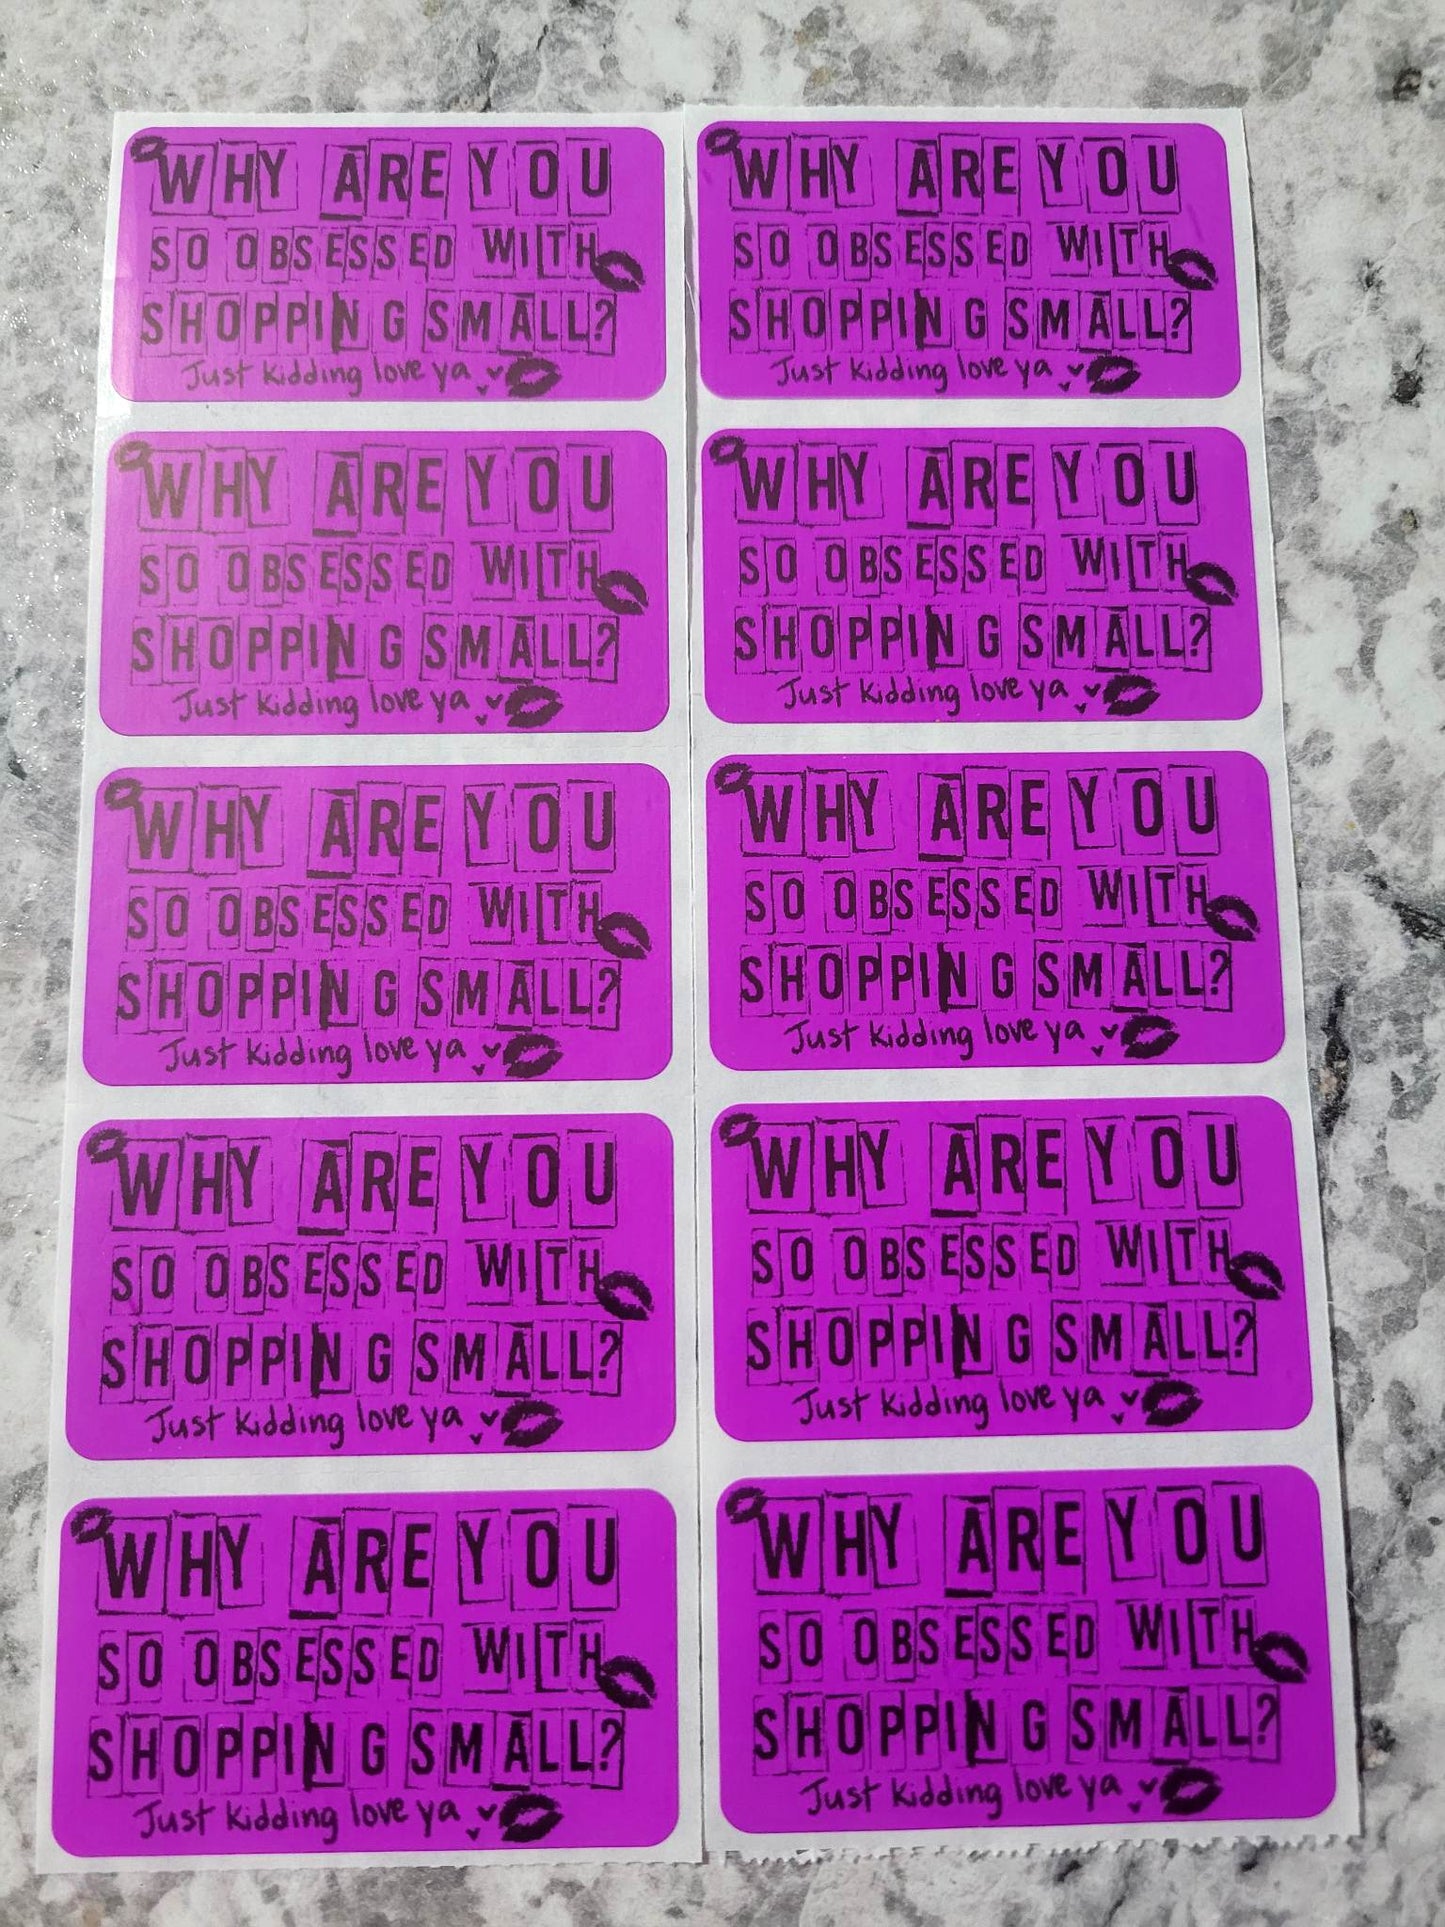 Why are you so obsessed with shopping small just kidding love ya thermal stickers 50 OR 100 count